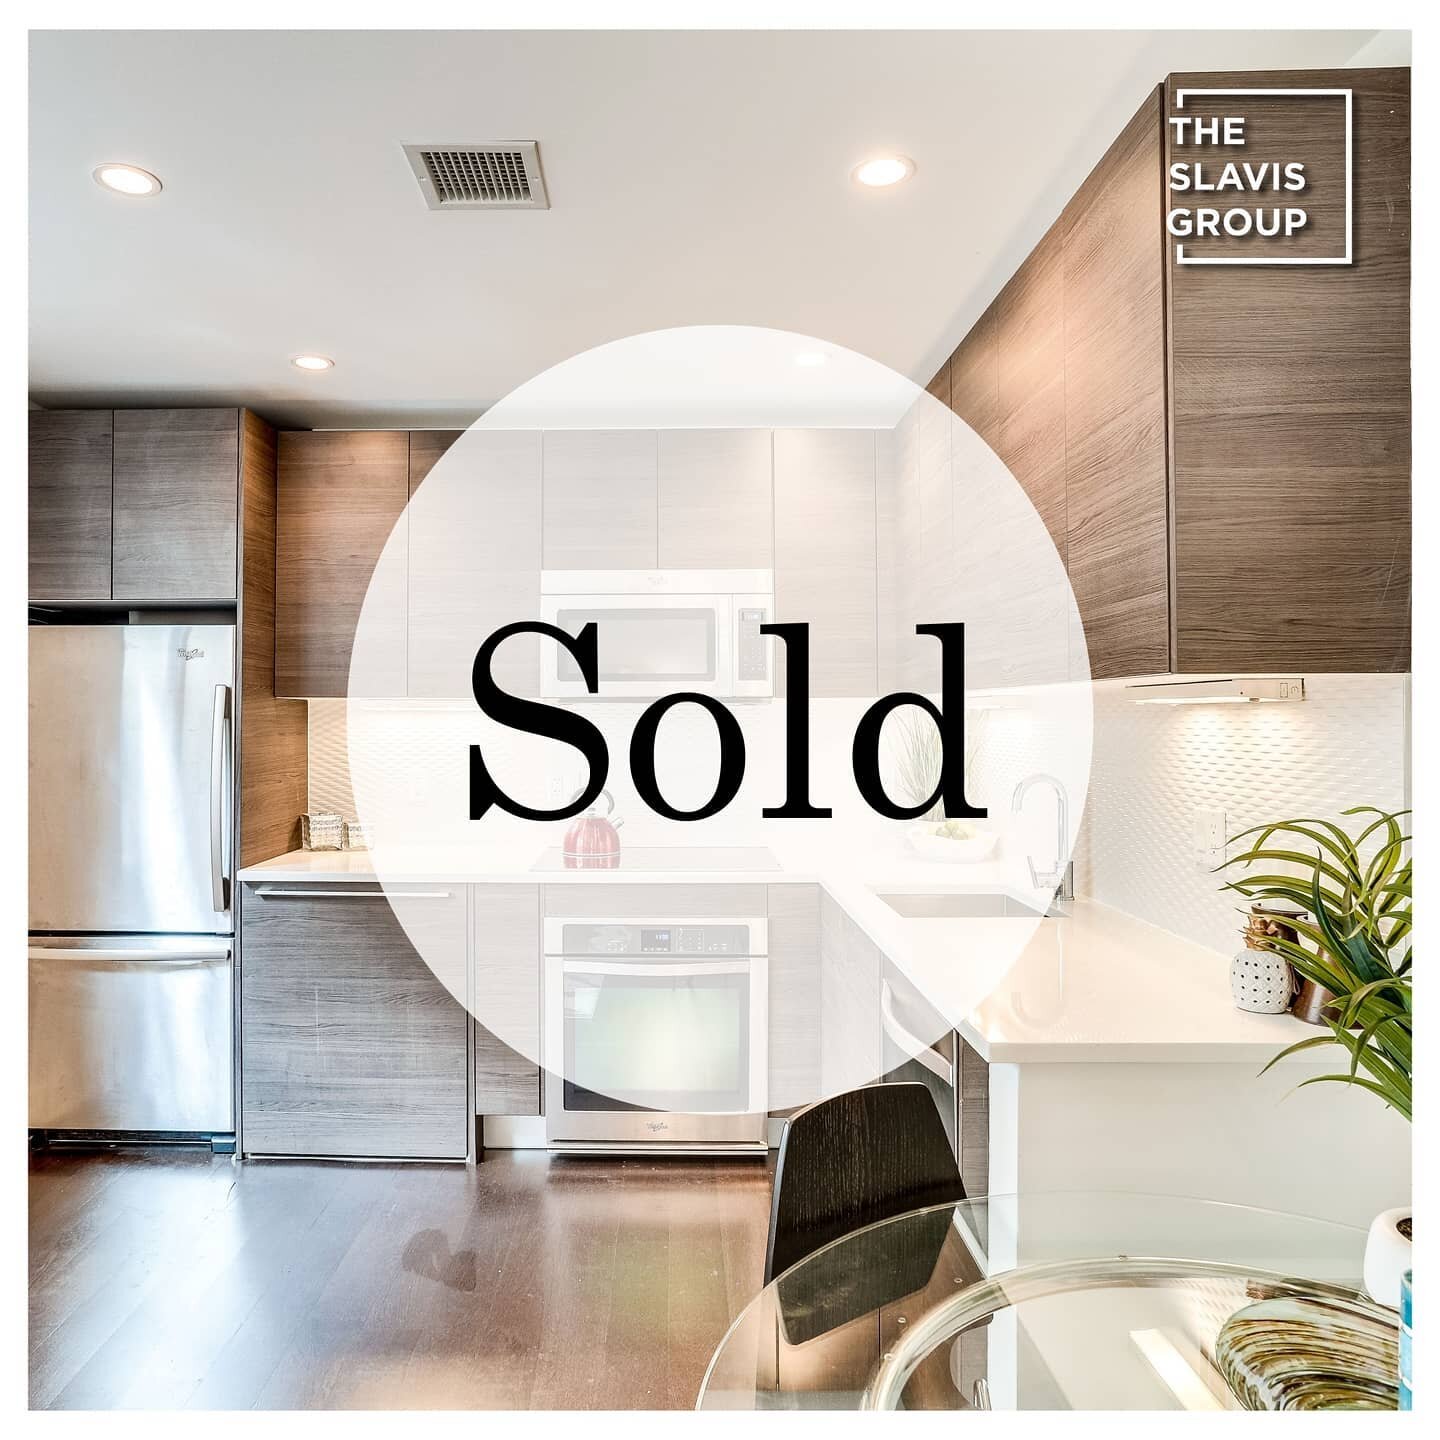 Sold! Congrats to buyer and seller alike! Many thanks to @cviewjr from the Jason Martin Group for such a smooth and professional process. #columbiaheights #slavisgroup #sngrealty #sold #realestate #dcrealestate #realtor #toprealtor #dcrealtor #listin